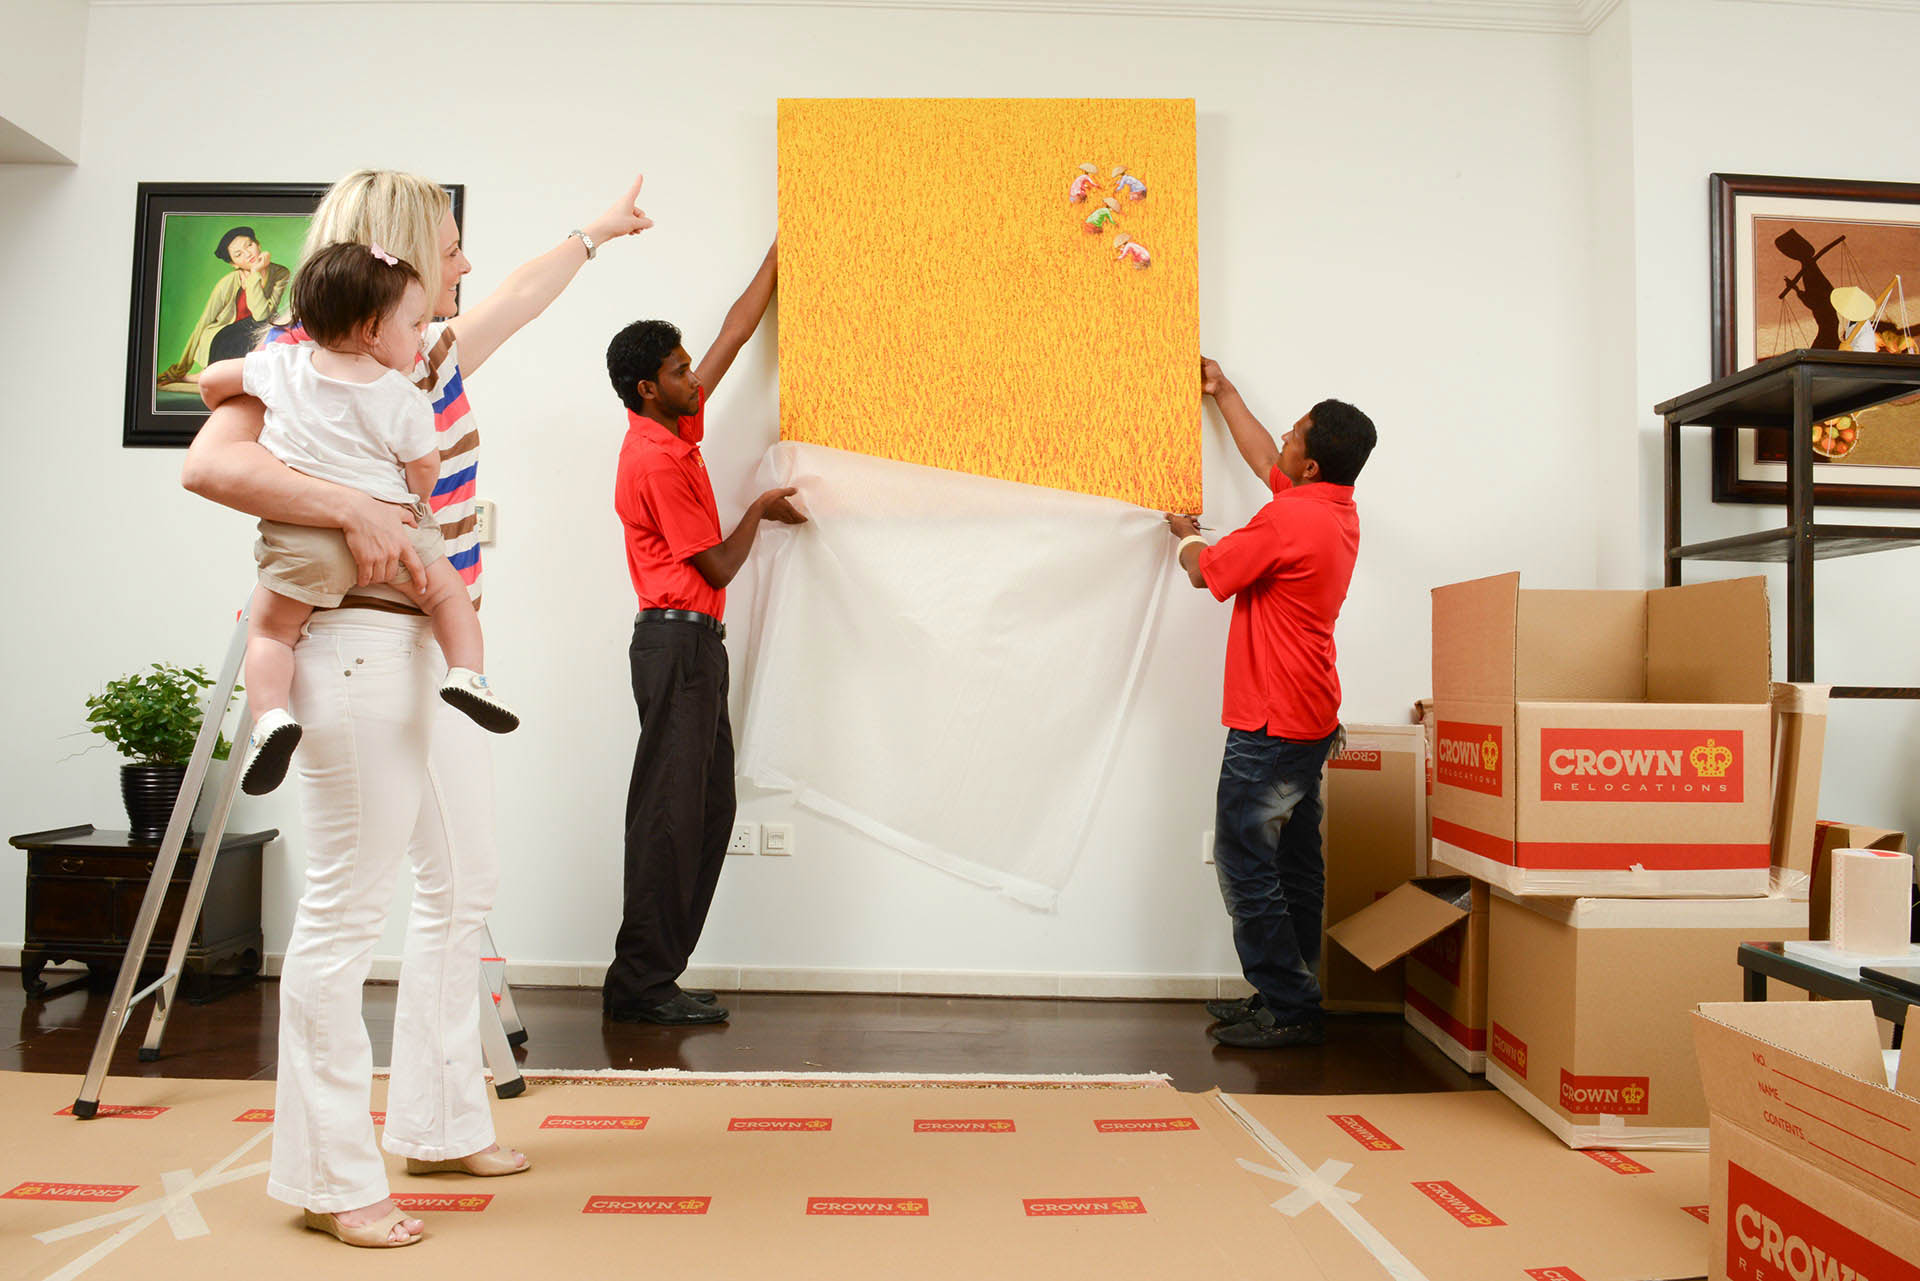 packers and movers putting up a wall painting while a woman carrying a child provides direction